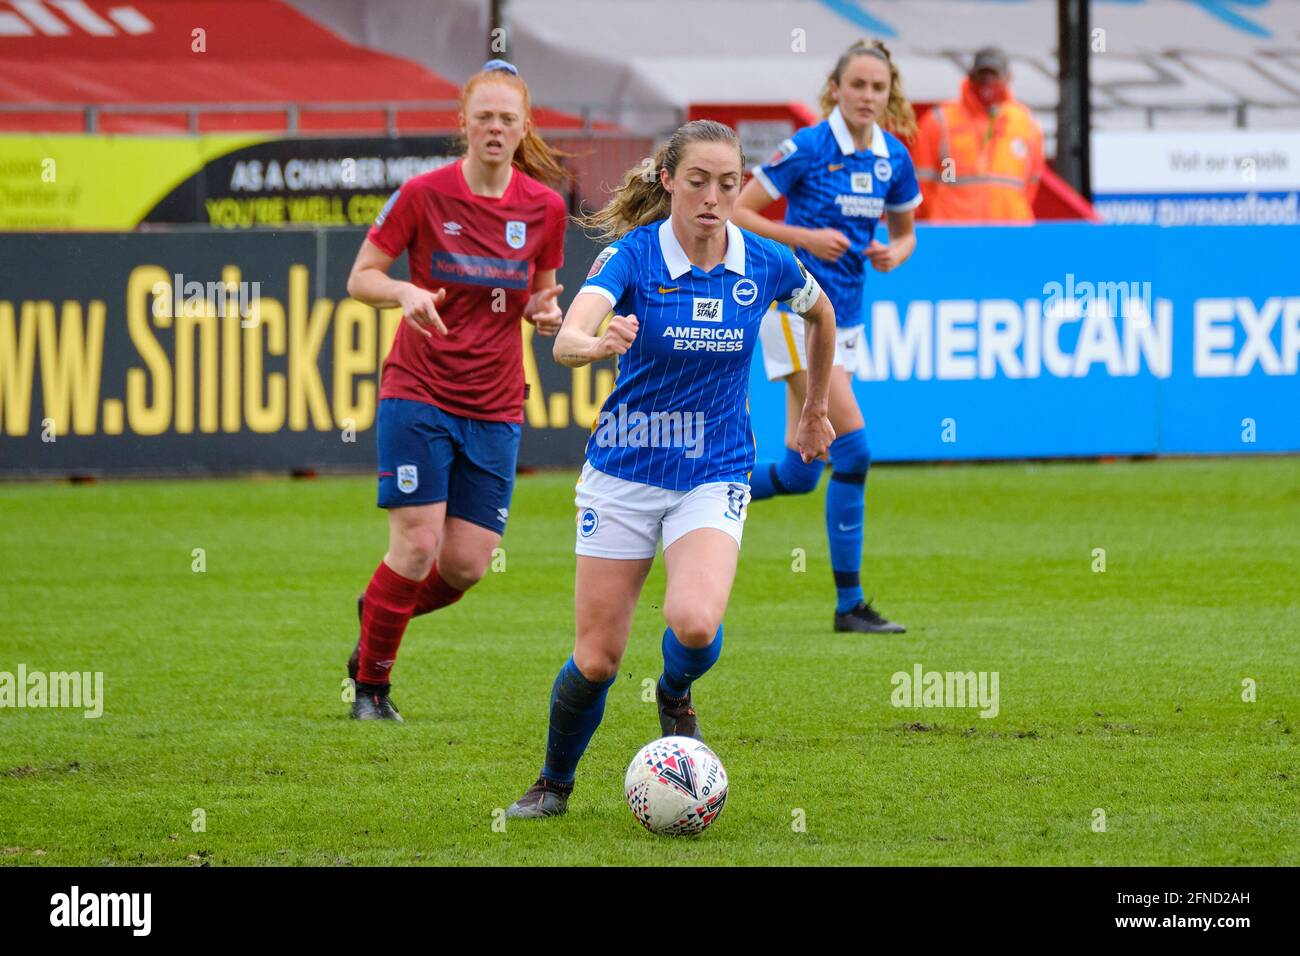 Crawley, UK. 16th May, 2021. Megan Connolly (8 Brighton & Hove Albion) during the FA Cup game between Brighton & Hove Albion and Huddersfield Town at The Peoples Pension Stadium in Crawley Credit: SPP Sport Press Photo. /Alamy Live News Stock Photo